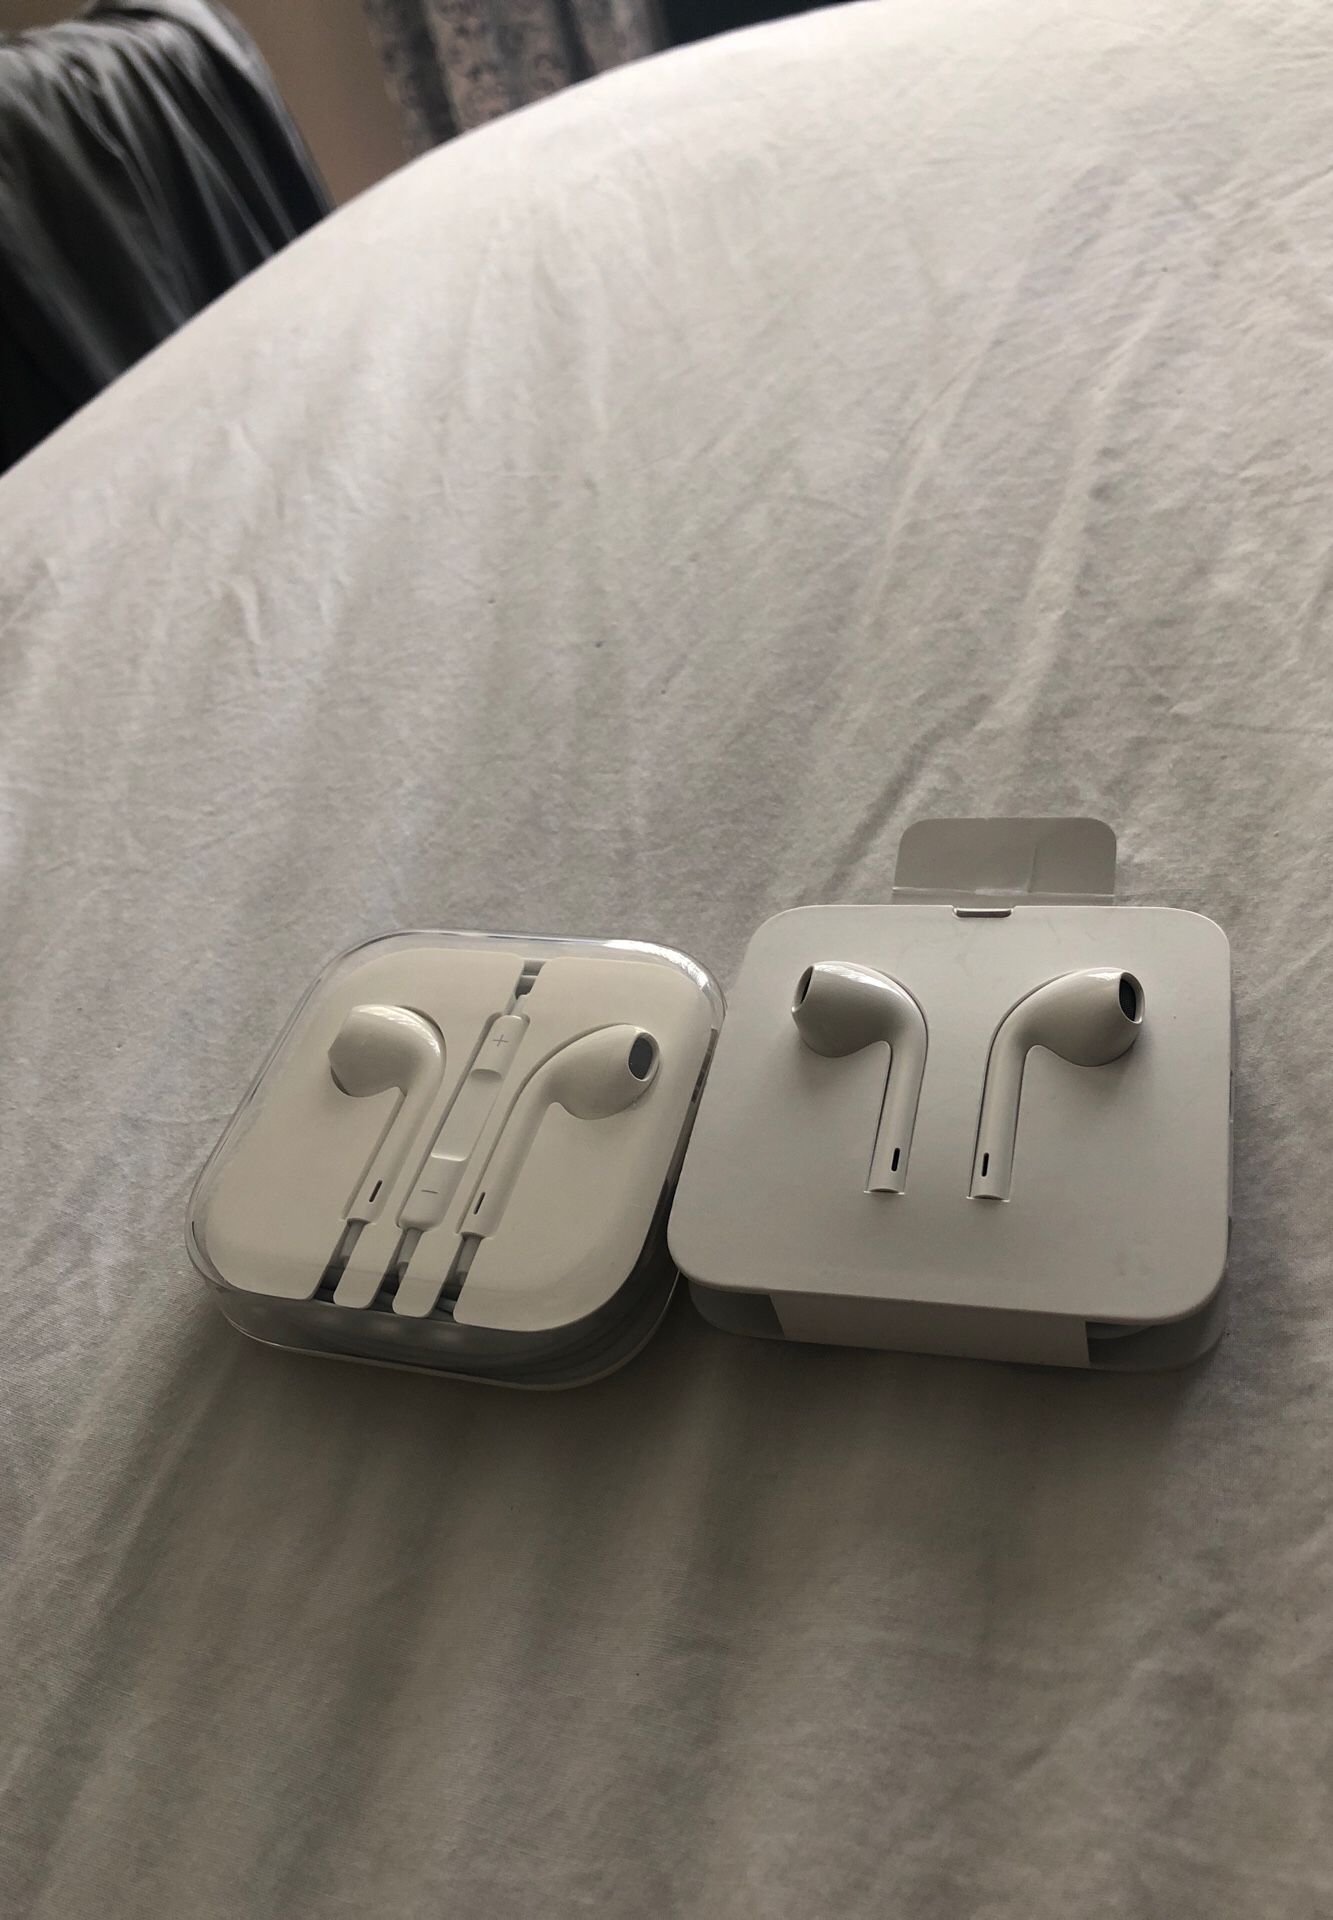 BRAND NEW Apple headphones!! Not wireless. One in box and one without but both NEVER USED.